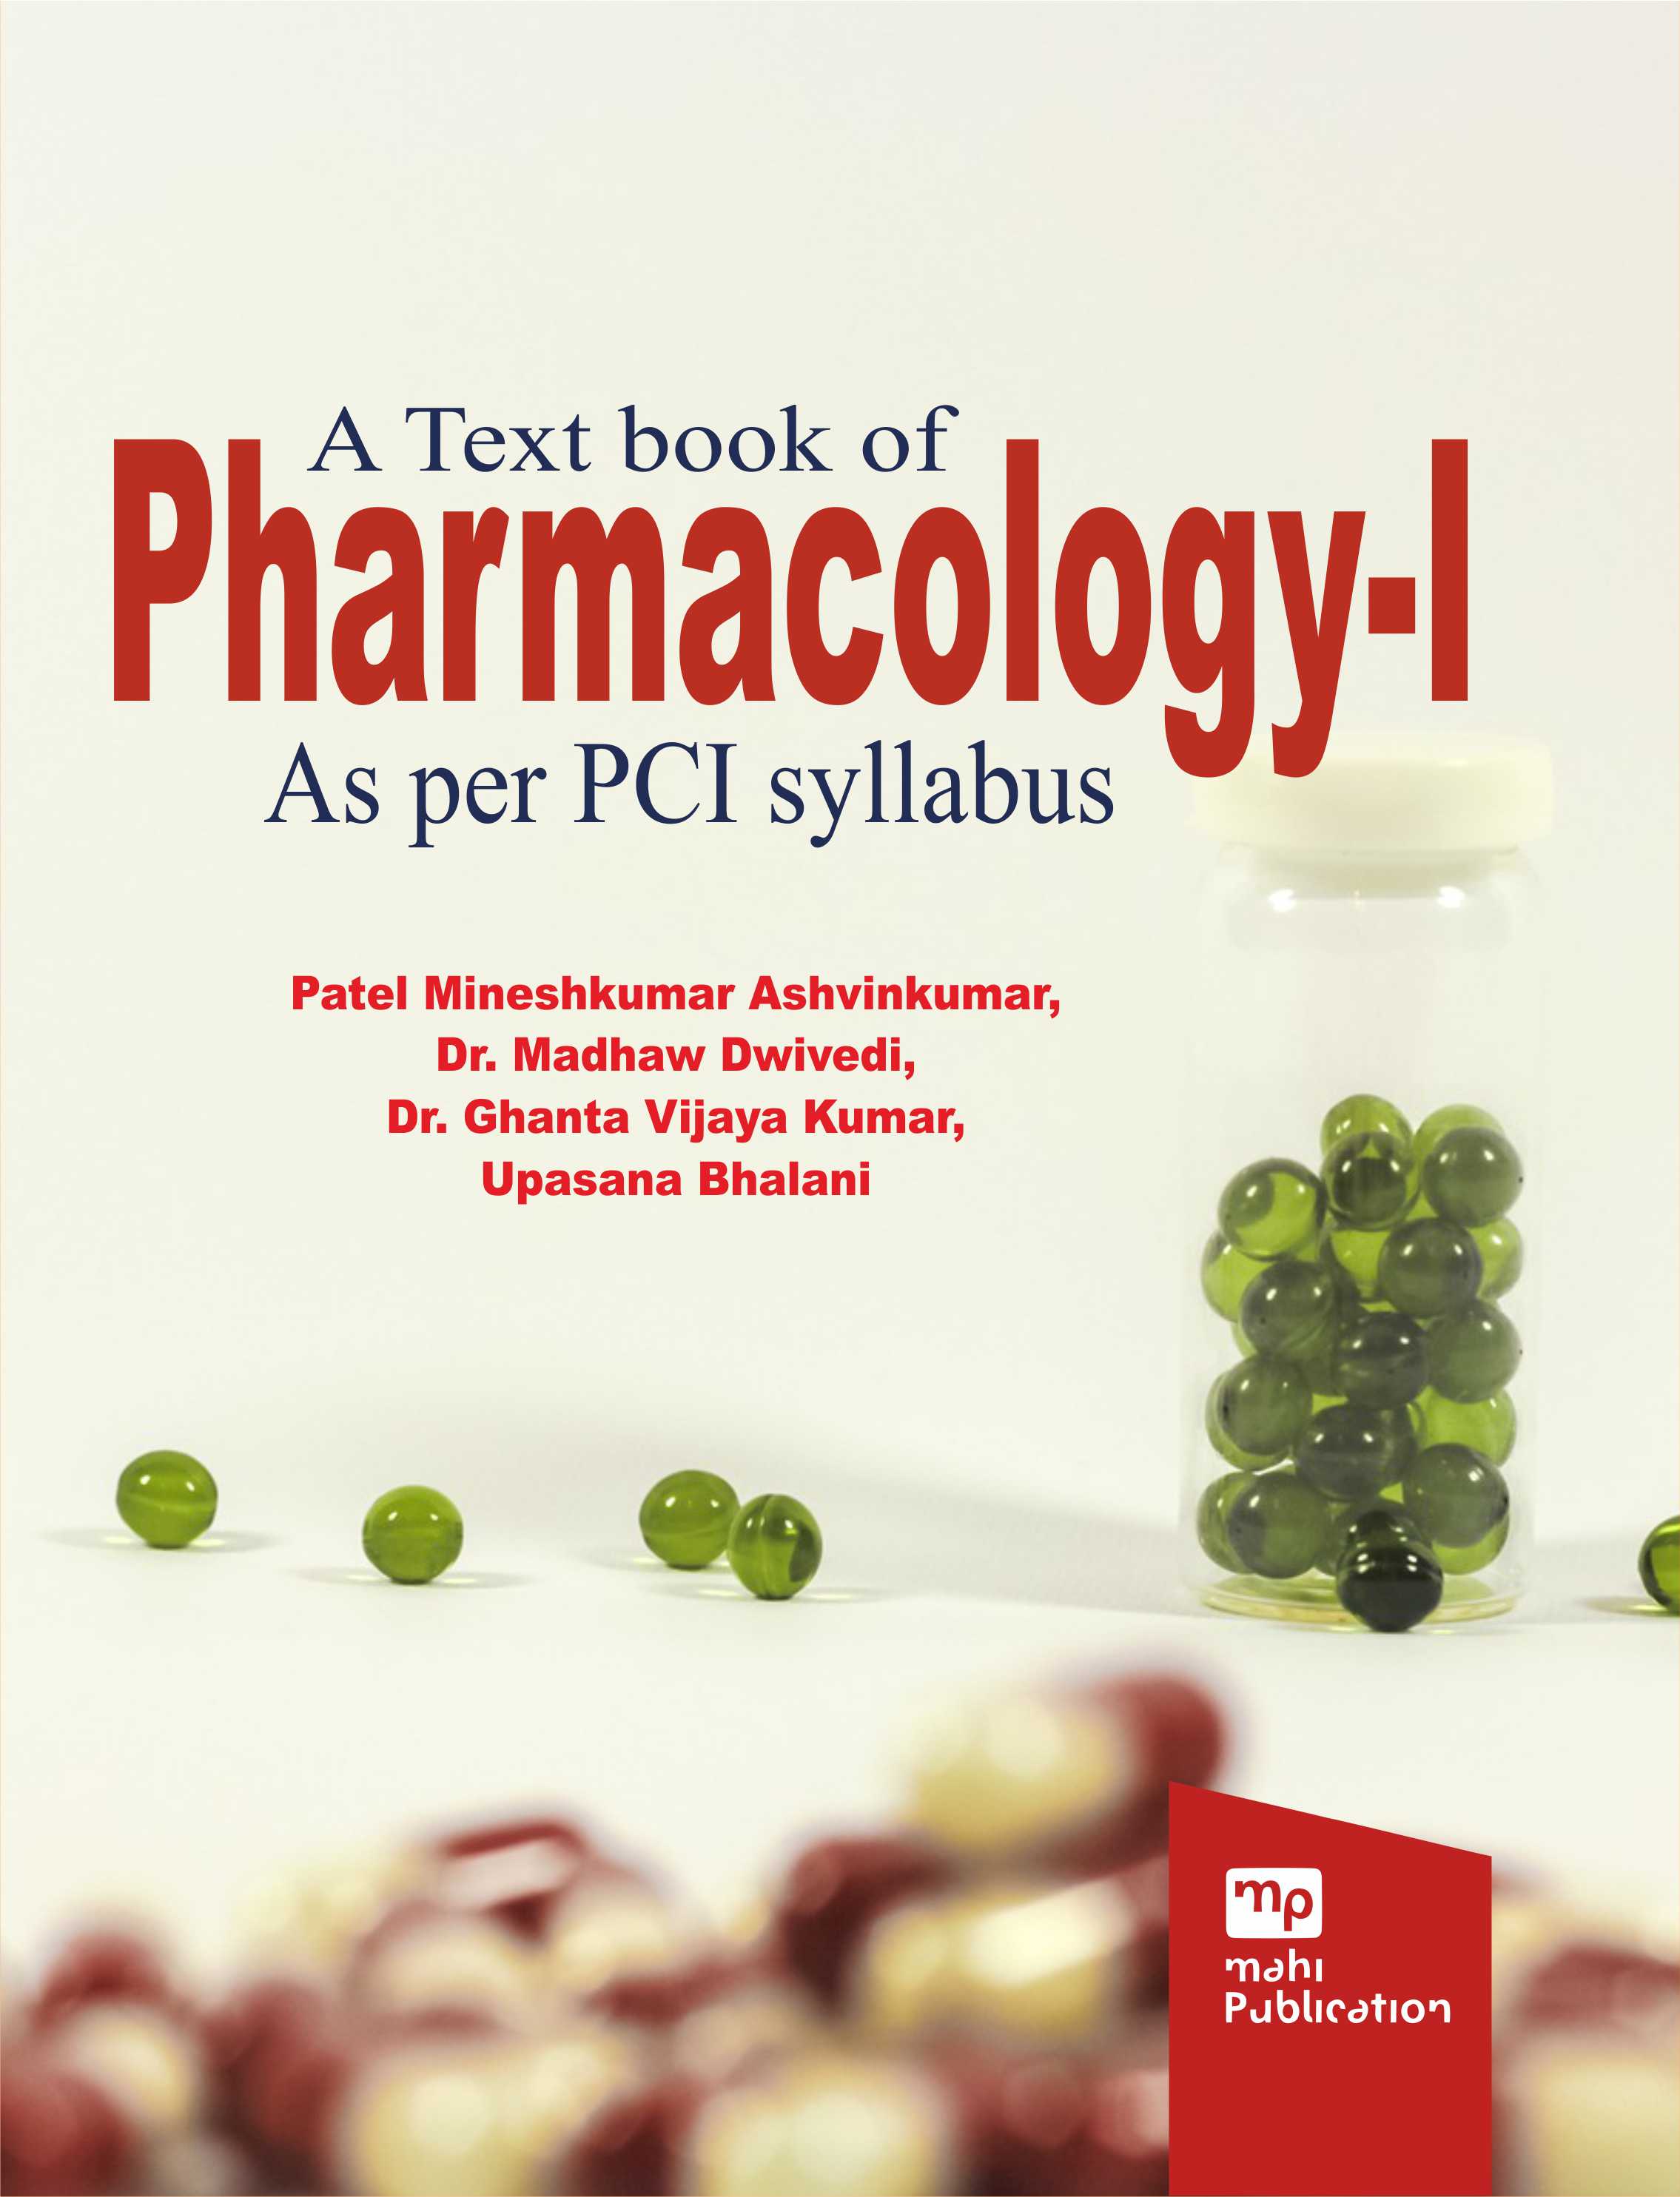 A Text book of Pharmacology-I As per PCI syllabus